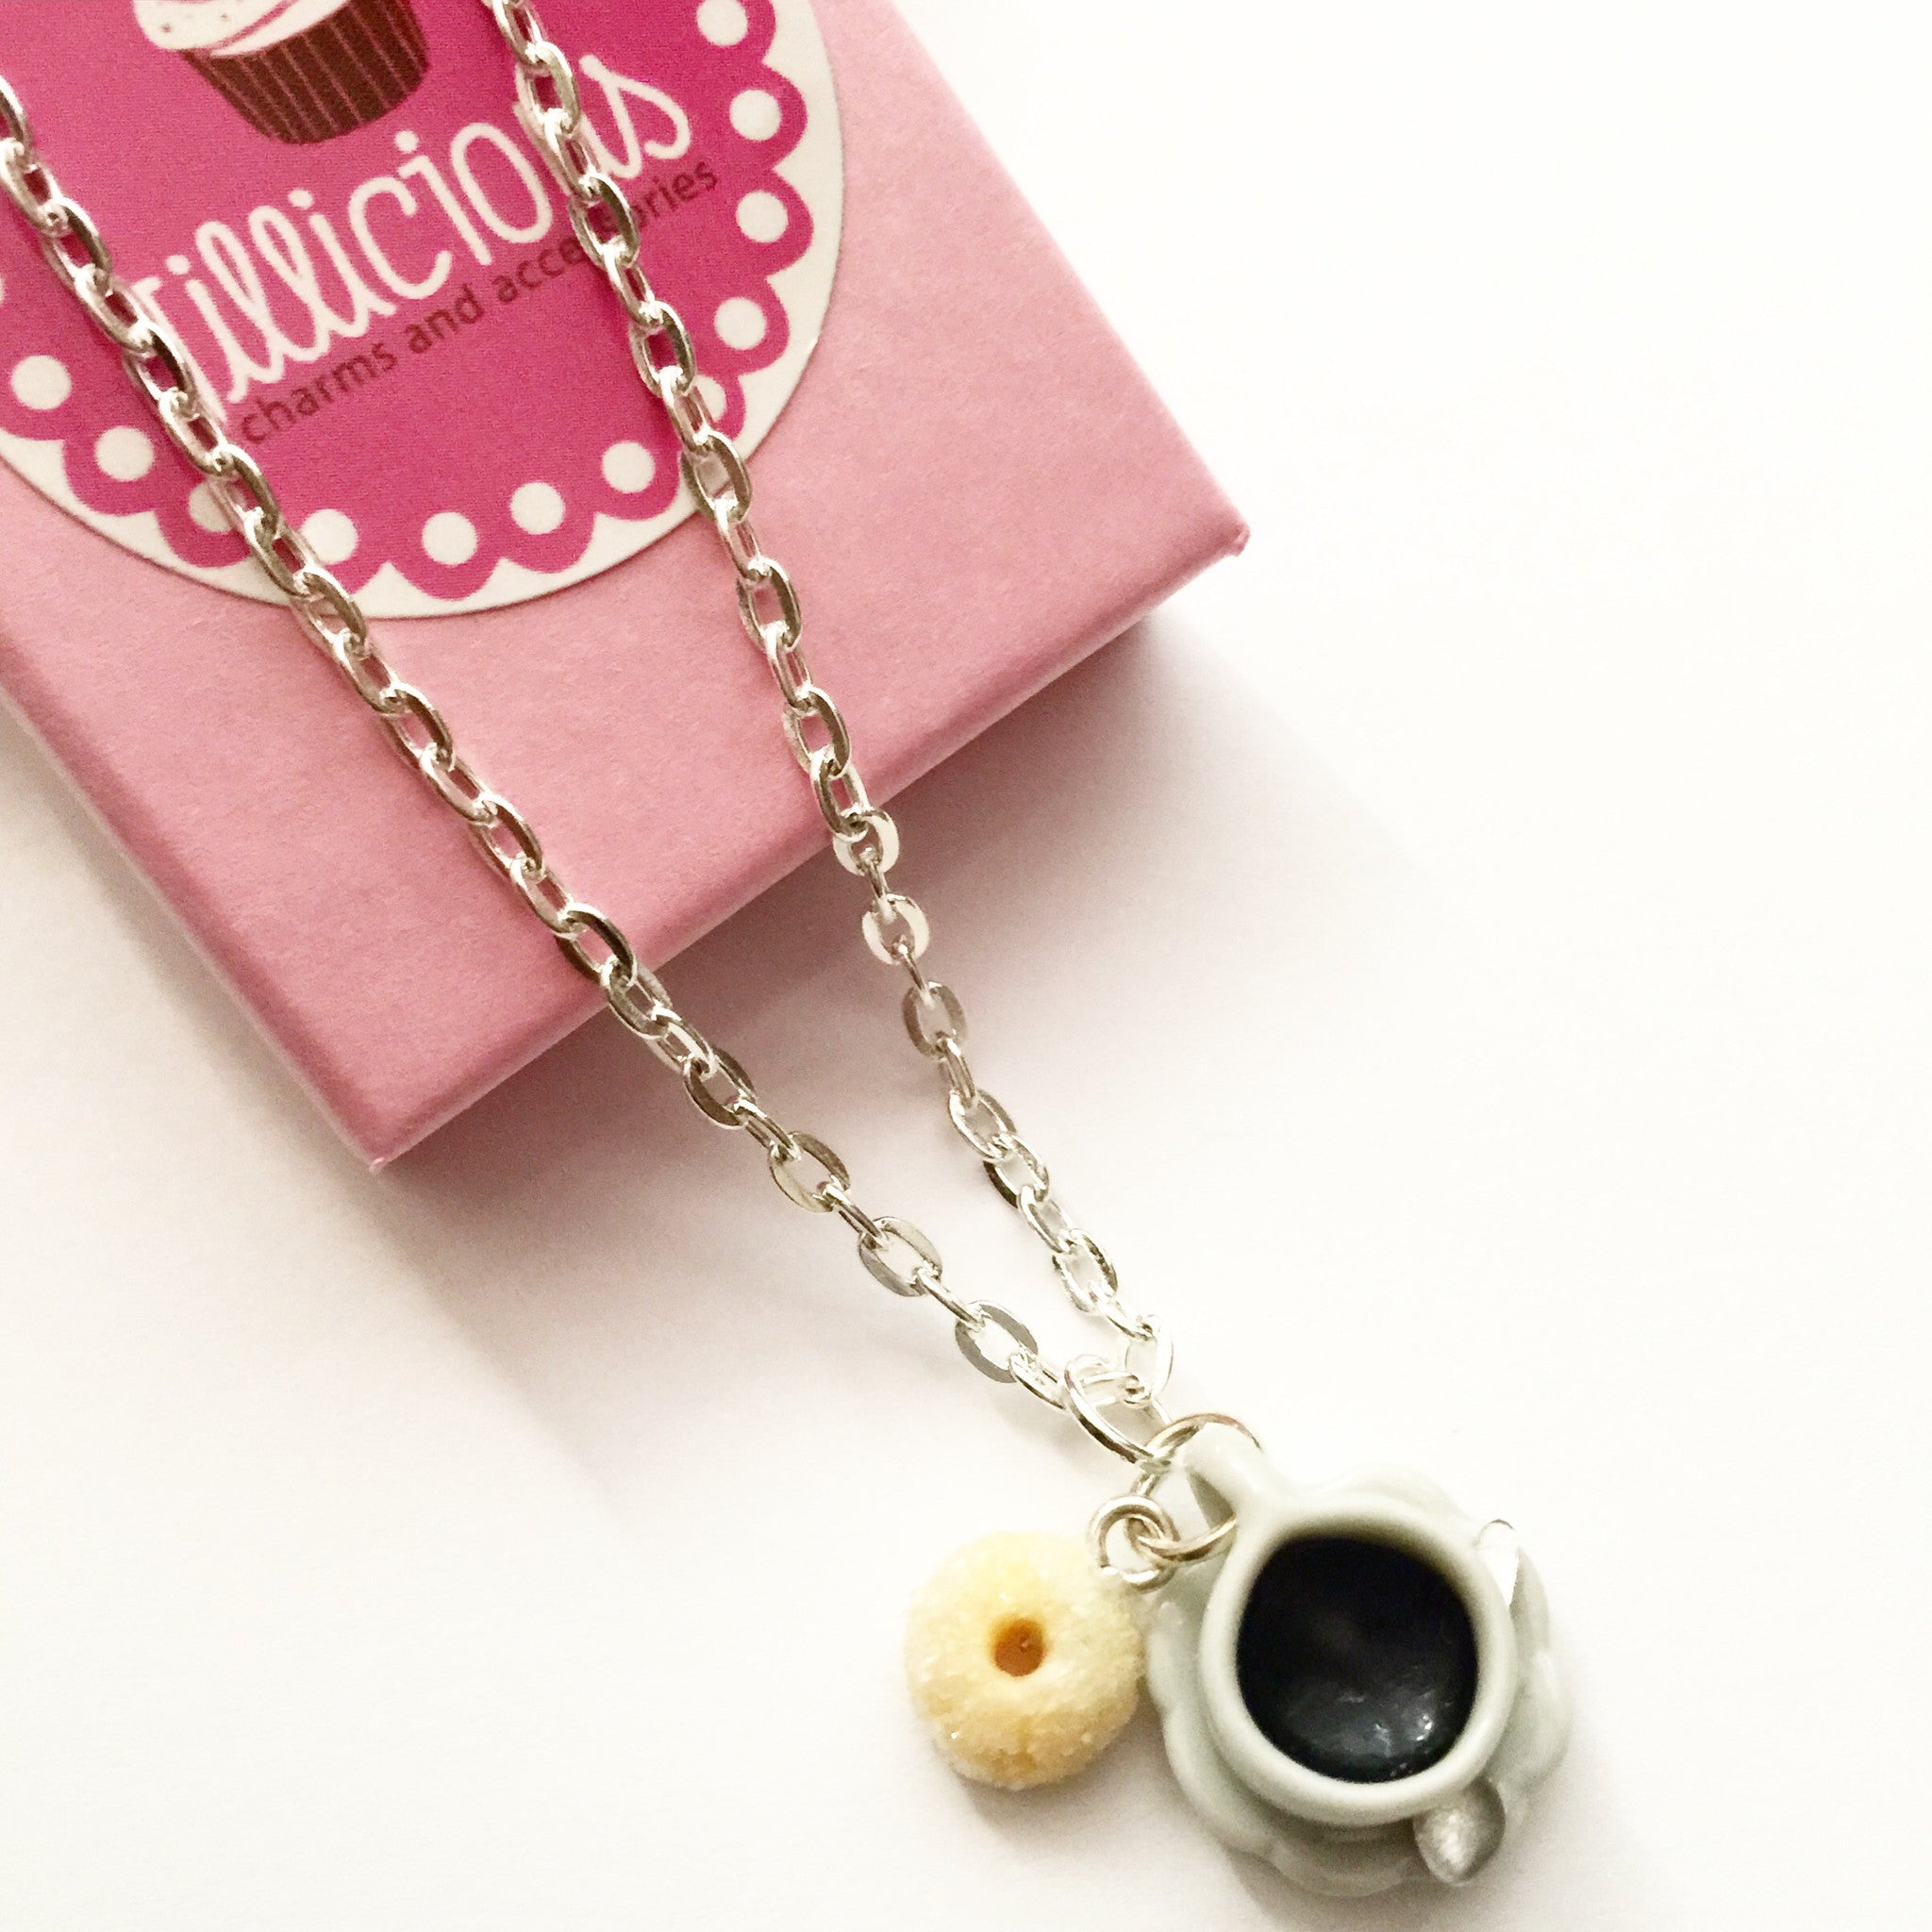 Sugar Donut and Coffee Necklace - Jillicious charms and accessories